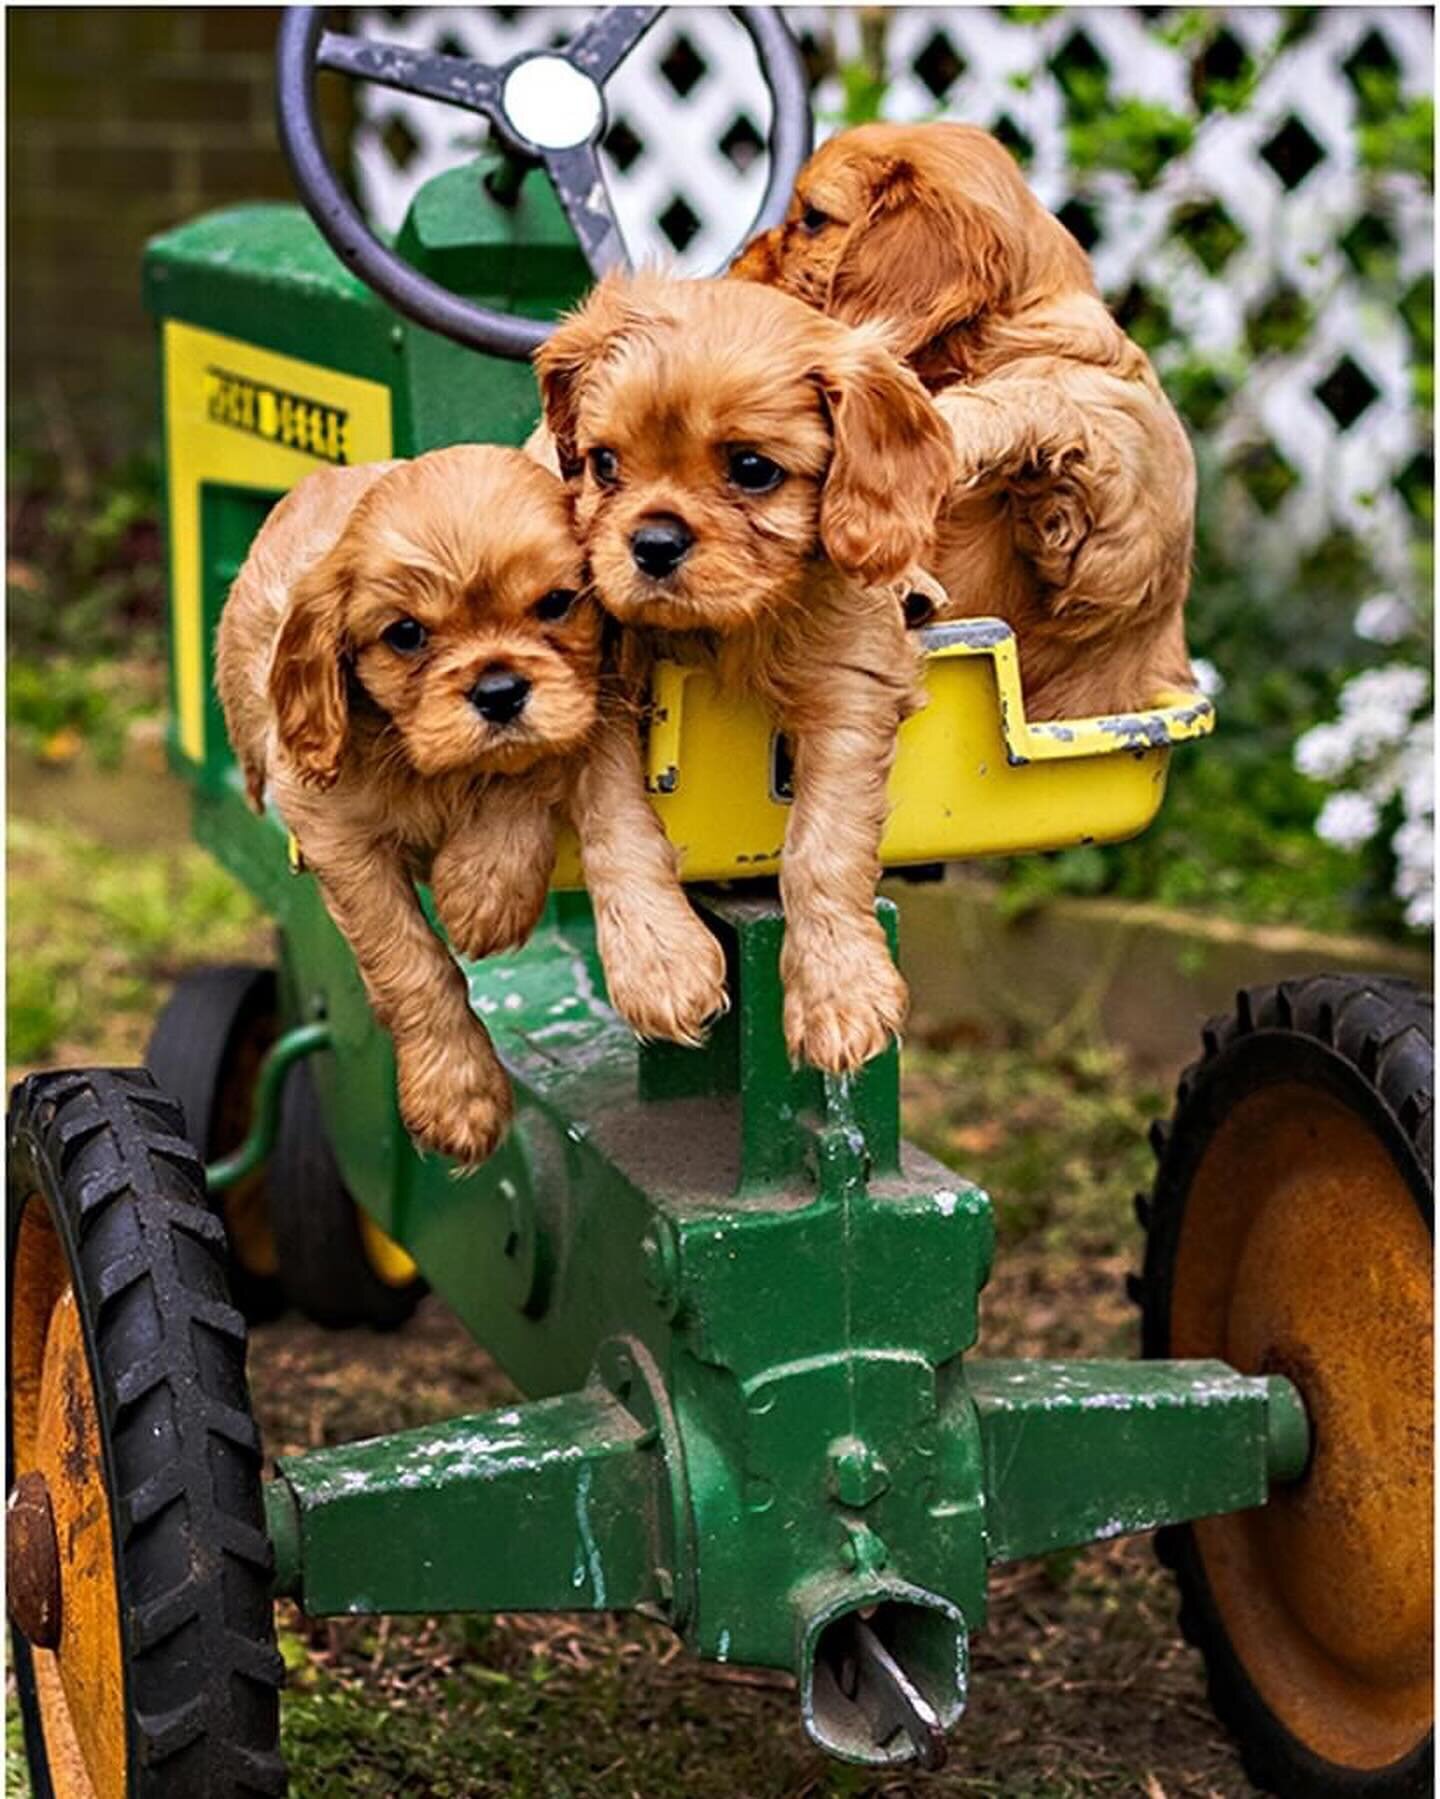 These sweet three are the last of their Cavalier King Charles Spaniel litter looking for their forever homes in Currituck!  If you have room in your heart and home for a new snugglebug and playmate, reach out to Kathie Foreman
252-722-4165 or k2forem